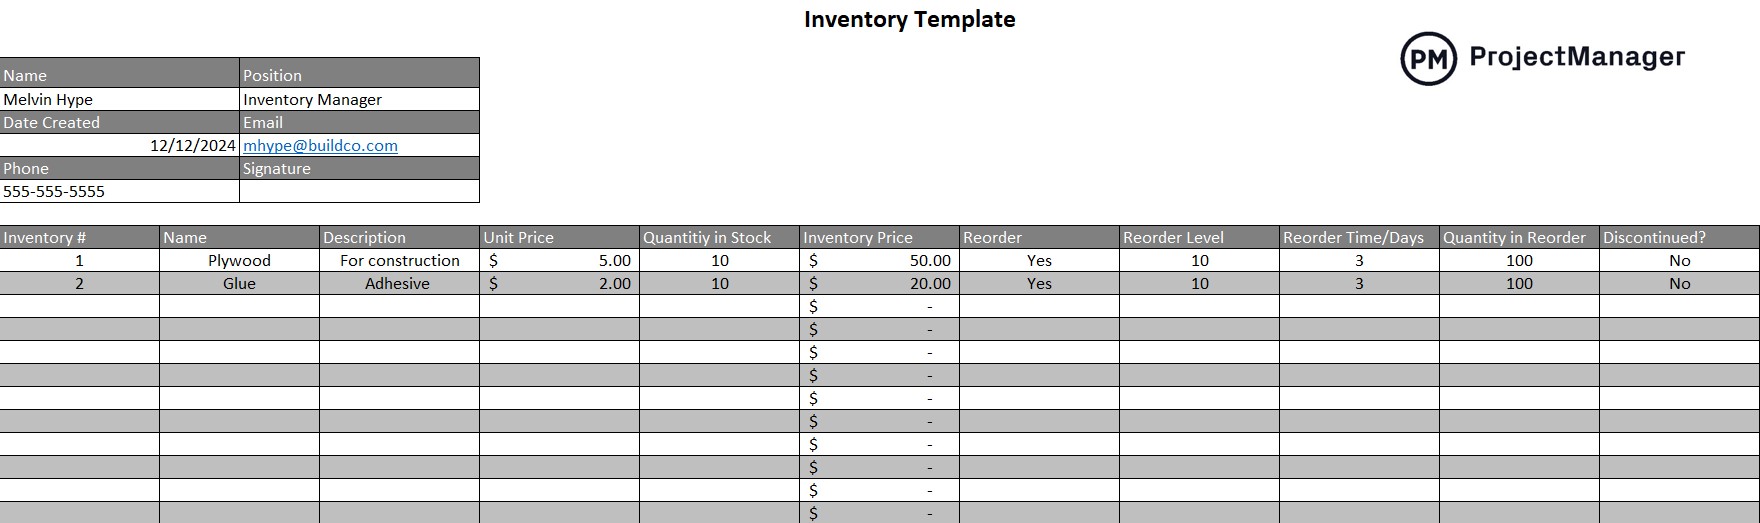 ProjectManager's free inventory template